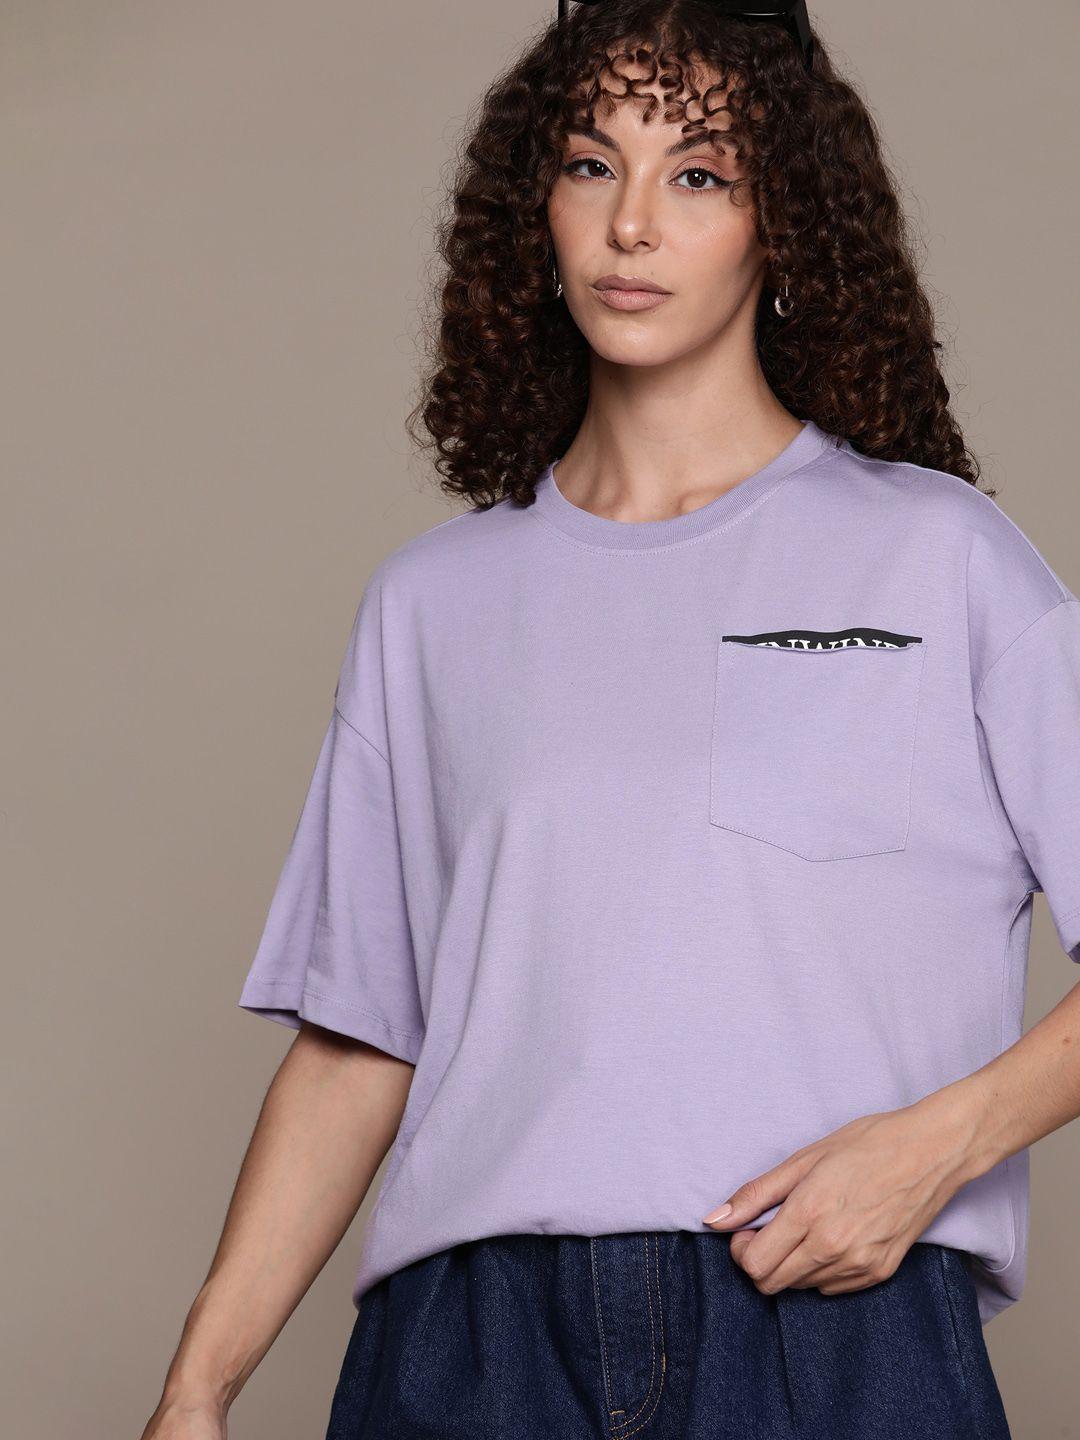 the roadster lifestyle co. pocket oversized t-shirt